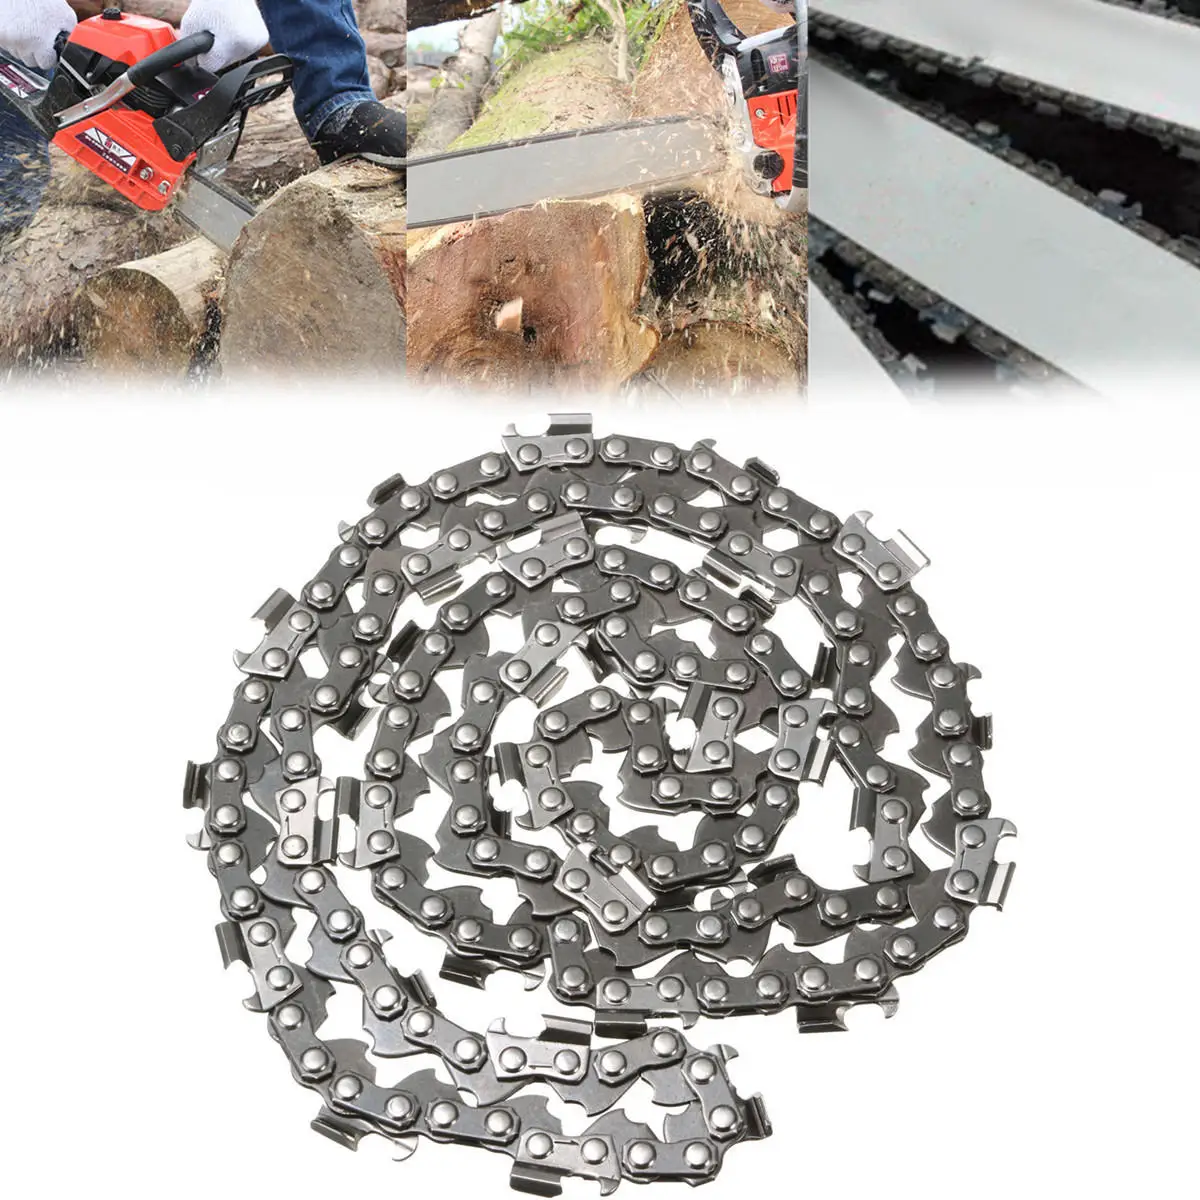 

20 Inch Chainsaw Saw Chain 76 Links Replacement Saw Mill Ripping Chain for Timberpro 62CC